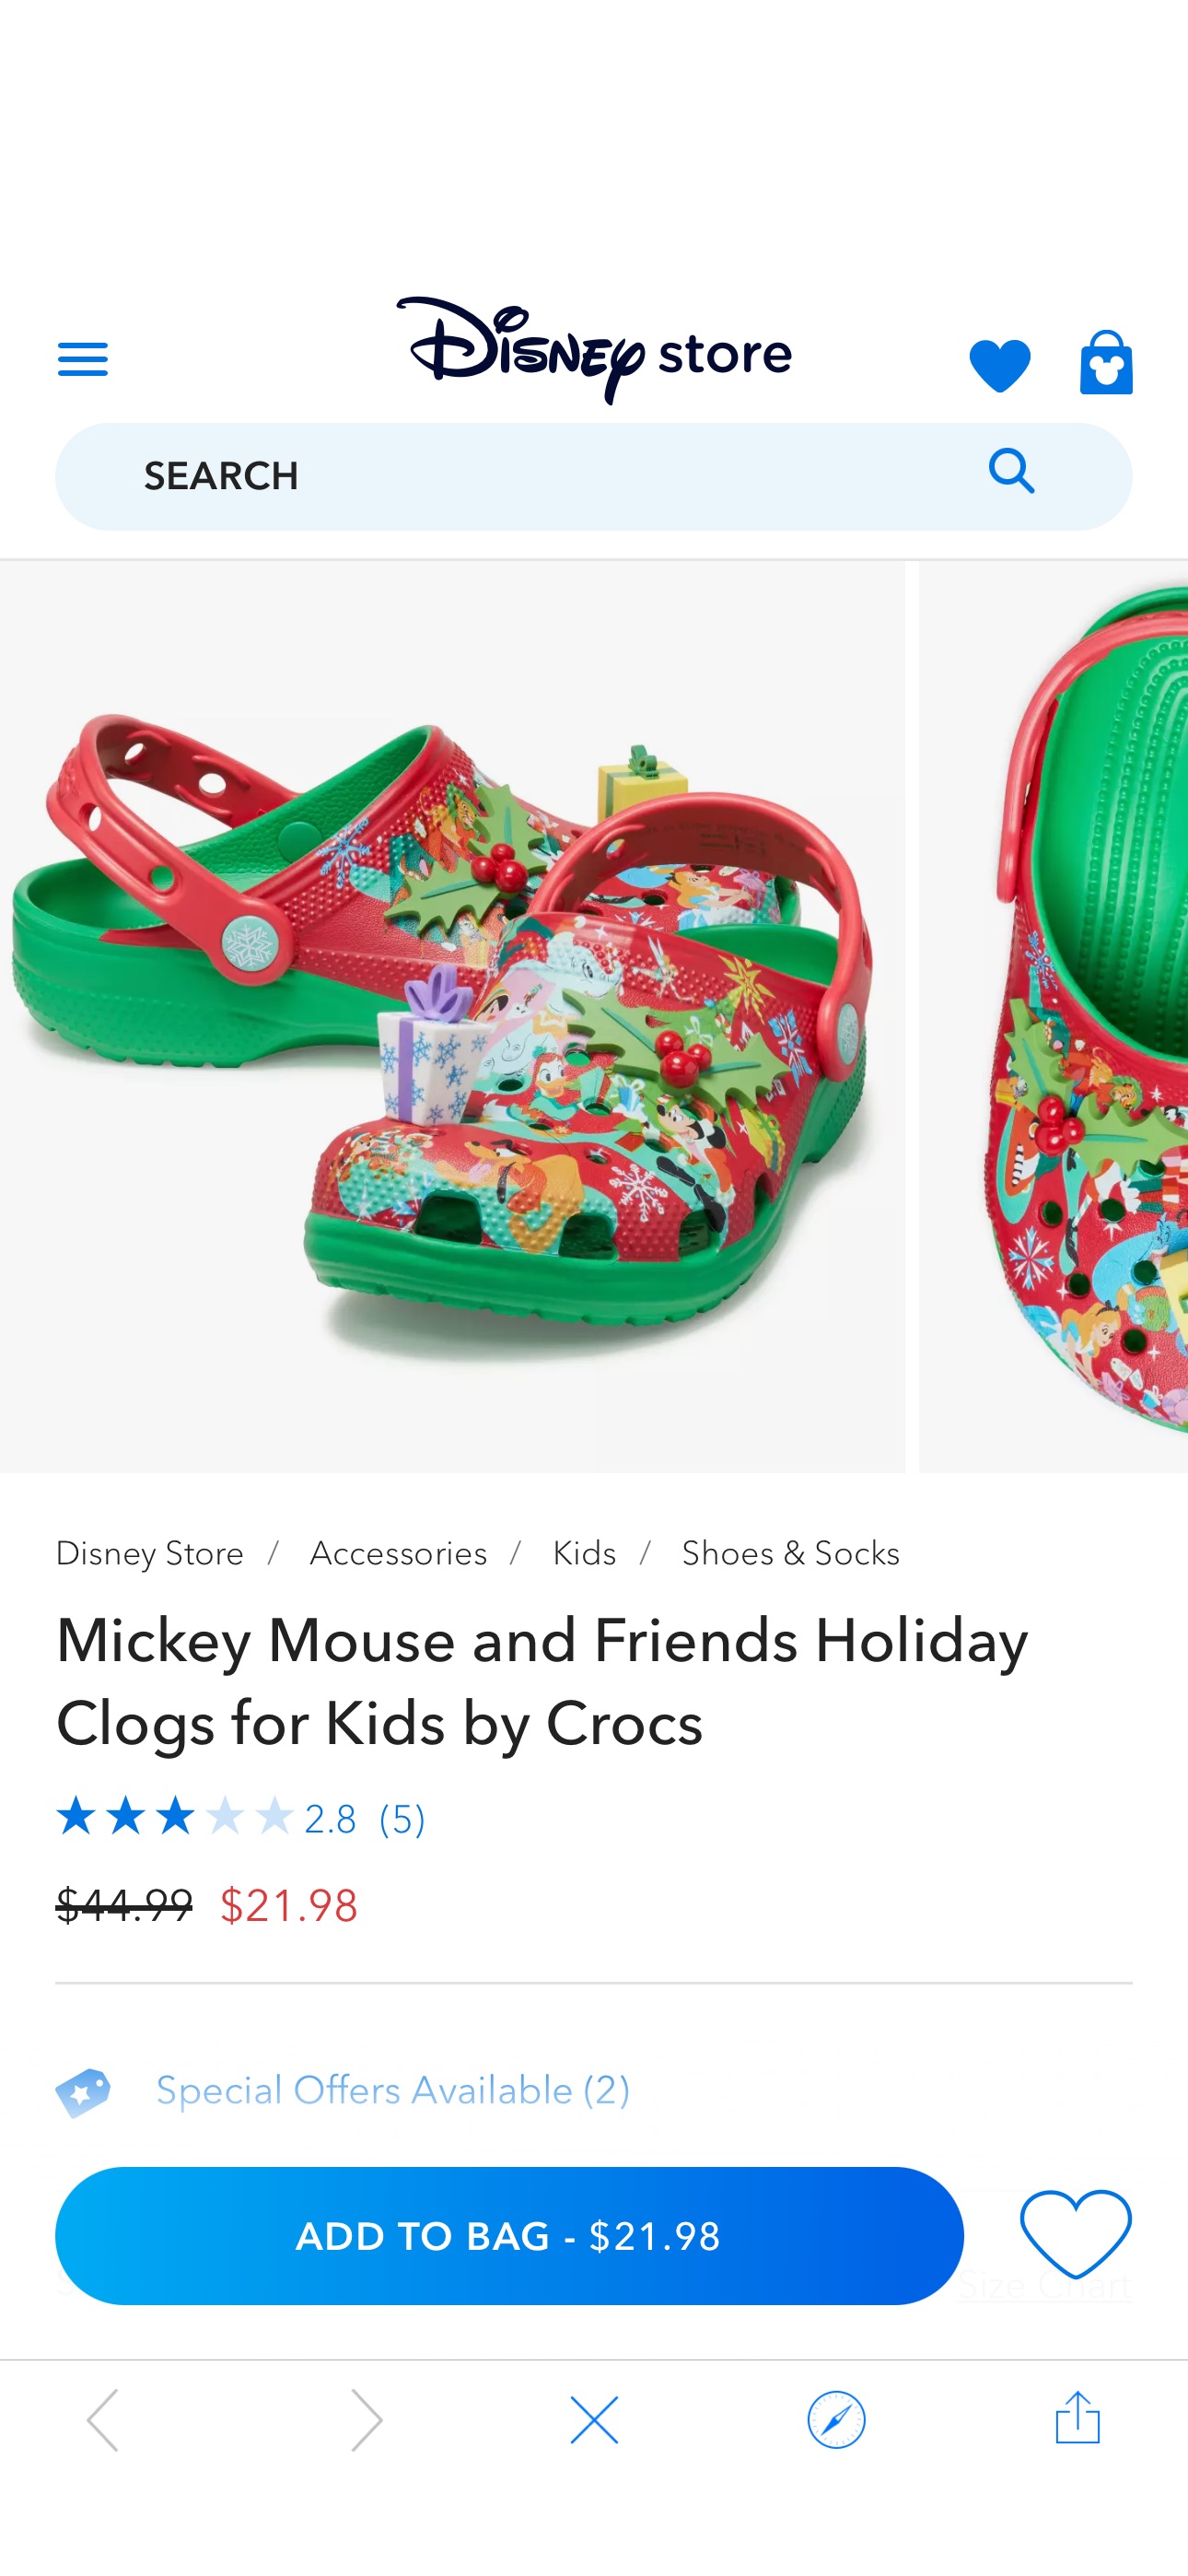 Mickey Mouse and Friends Holiday Clogs for Kids by Crocs | Disney Store折扣码：EXTRA25